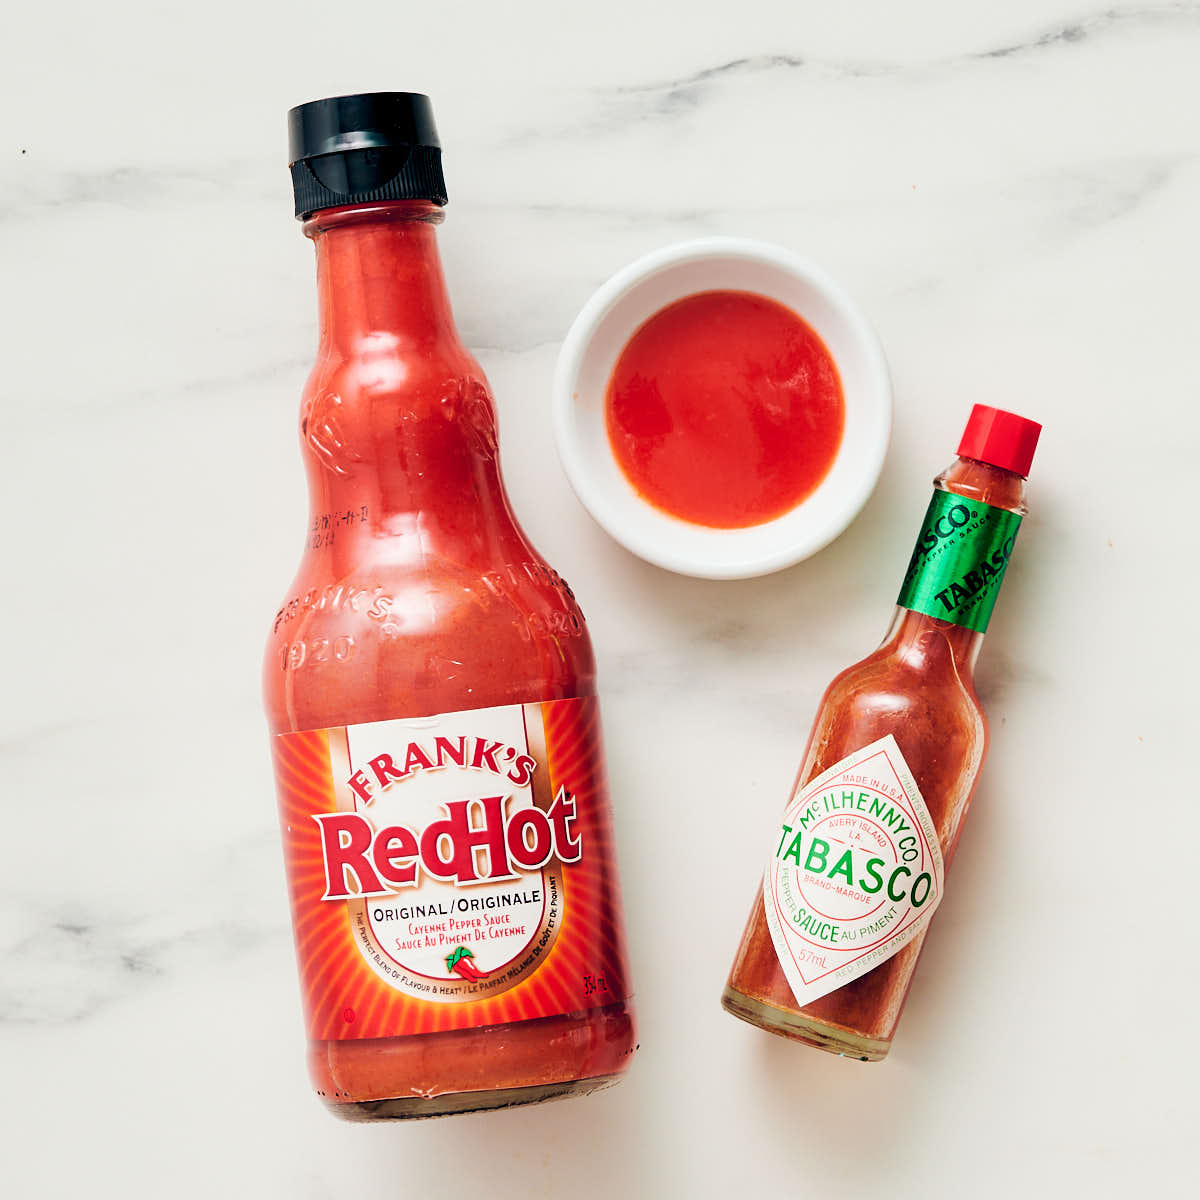 Louisiana-style hot sauce bottles (Frank's Red Hot and Tabasco) on a counter.